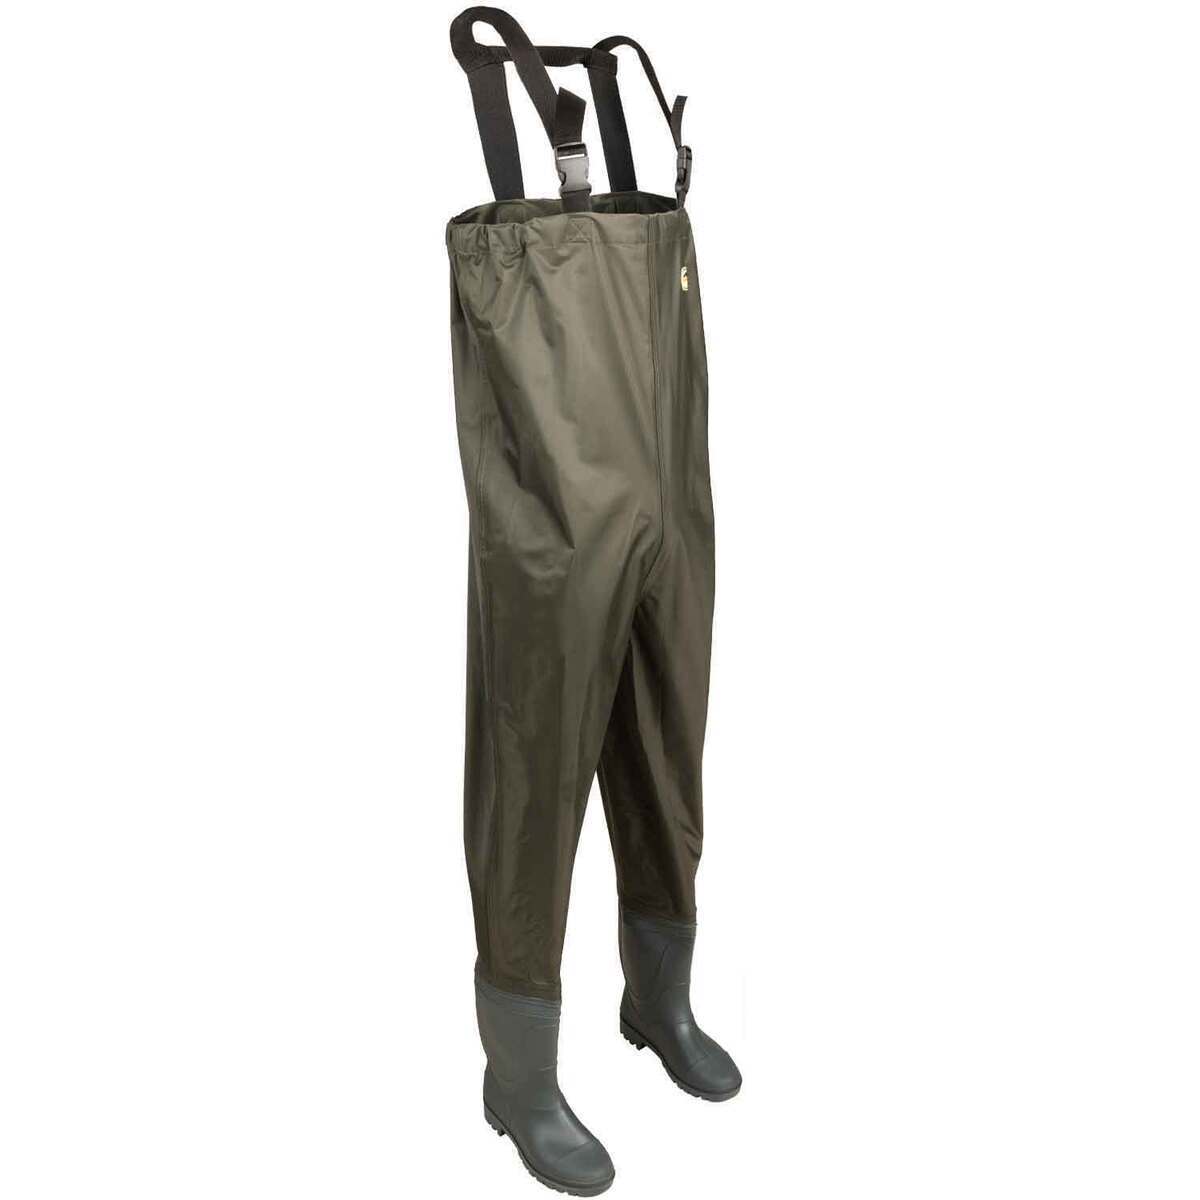 Kids Chest Waders Youth Fishing Waders For Toddler Children Water